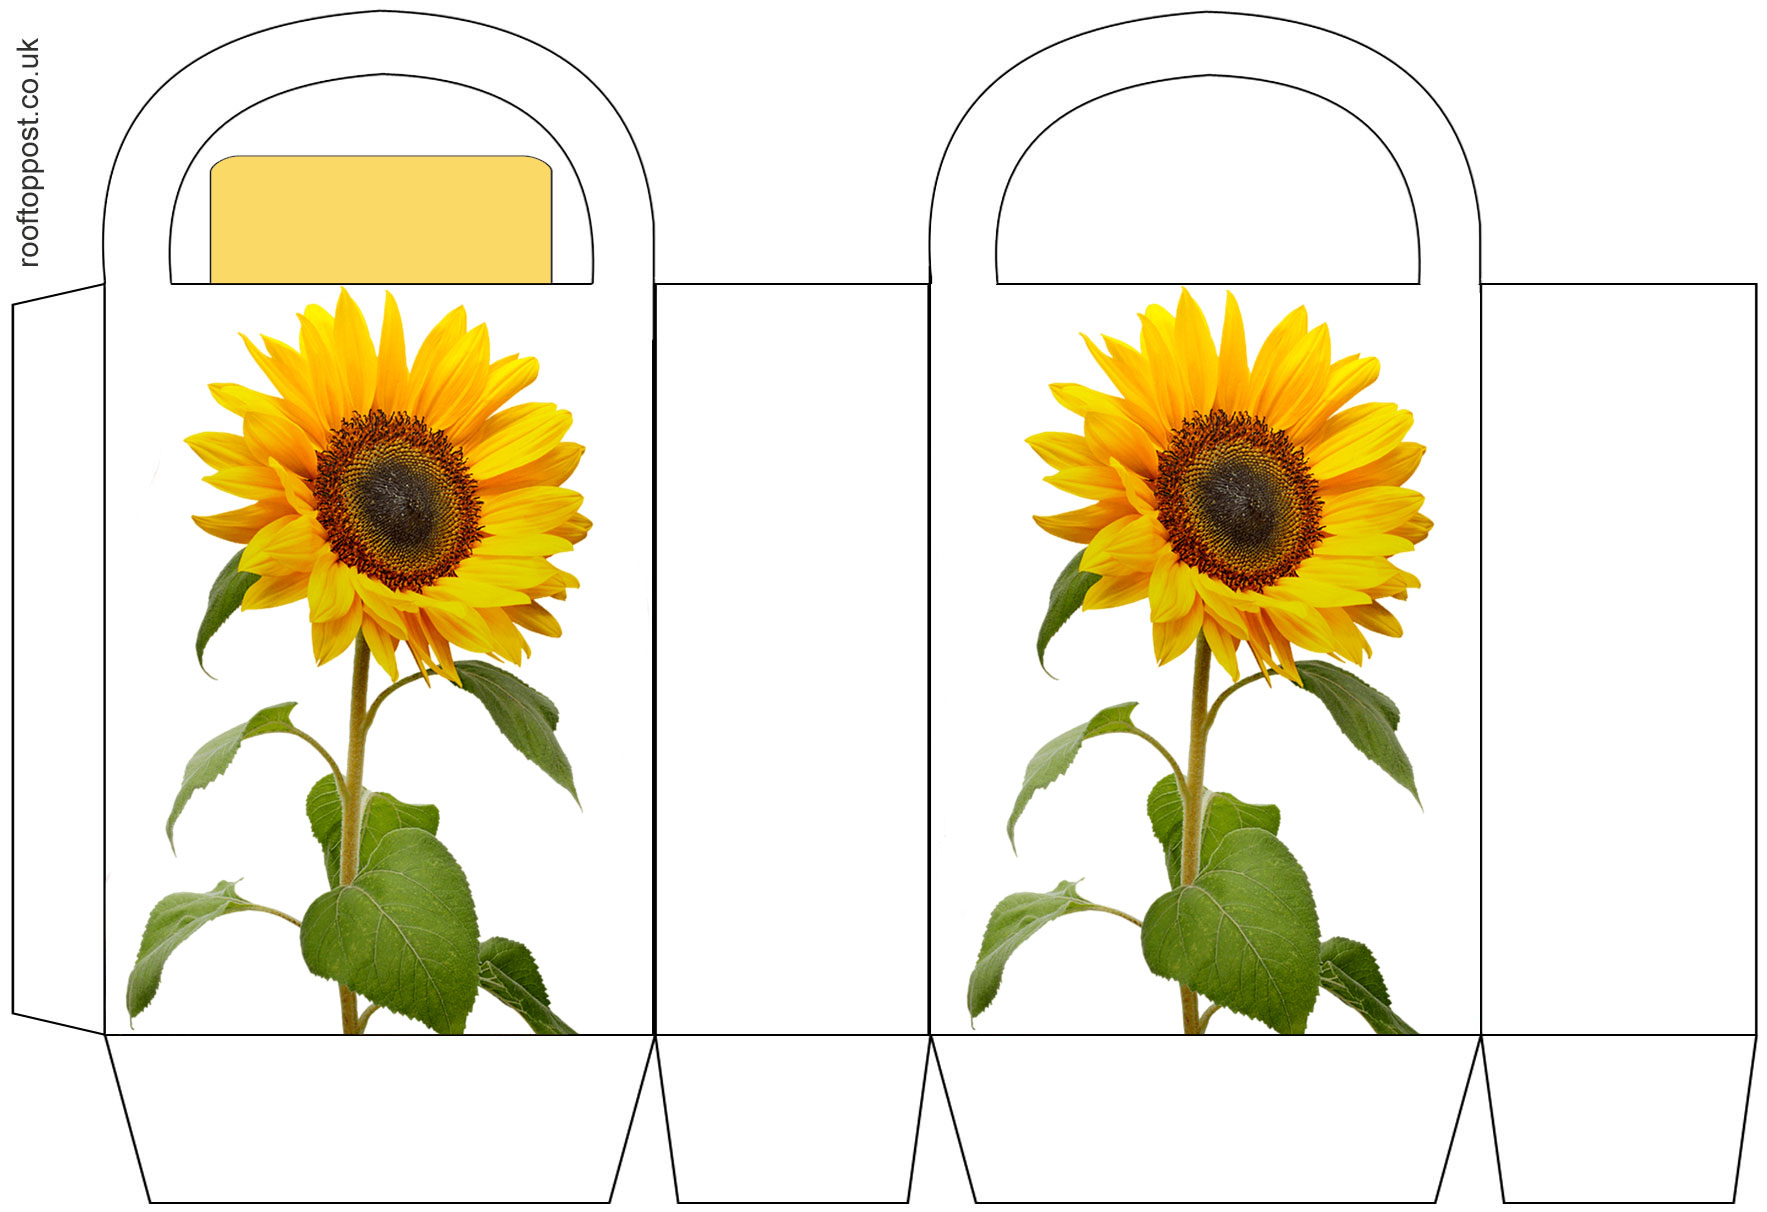 Printable party bag with a summer sunflower design.